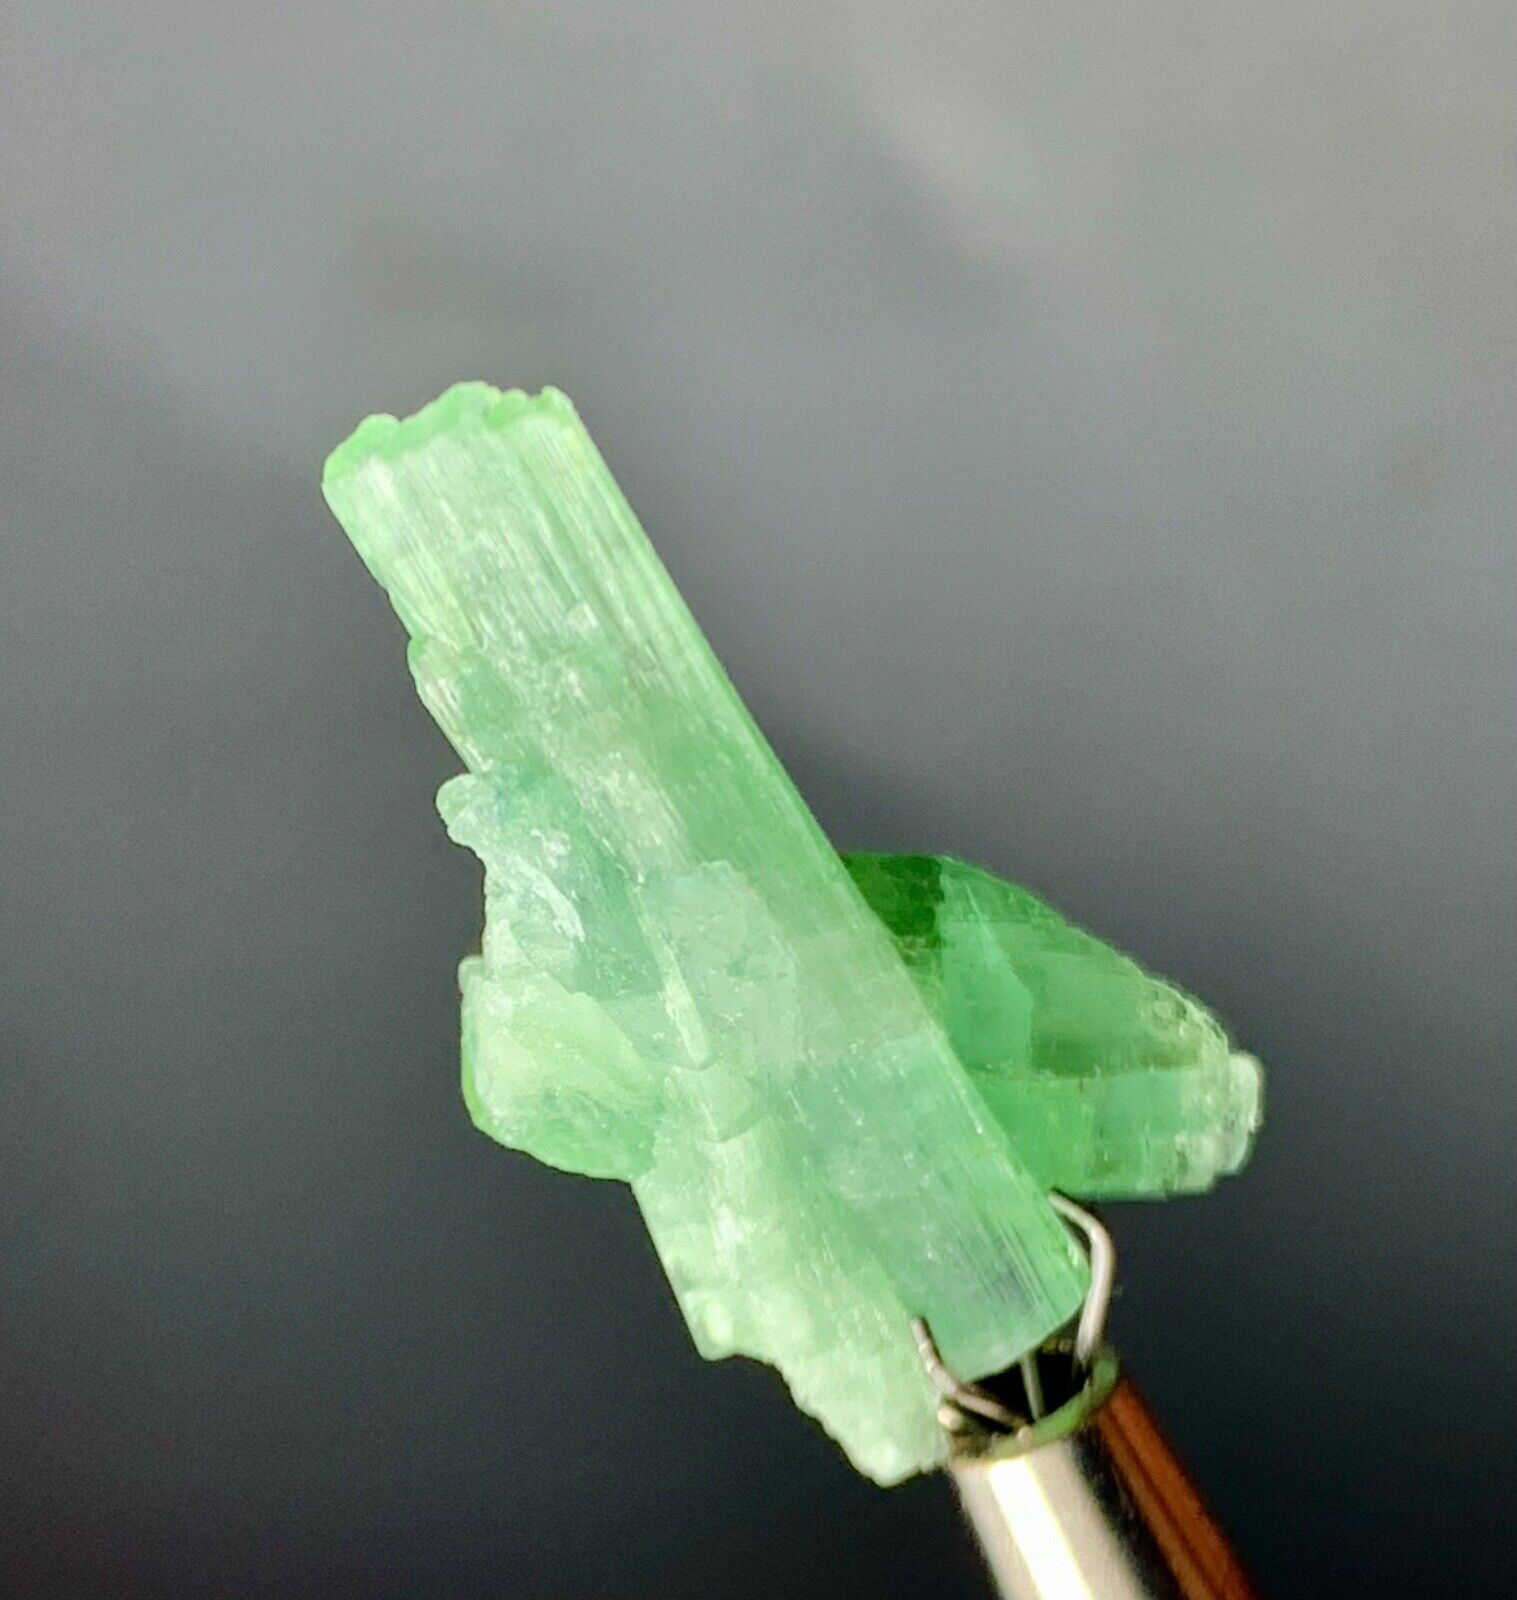 12 Cts Tourmaline Crystal with Albite  from Afghanistan